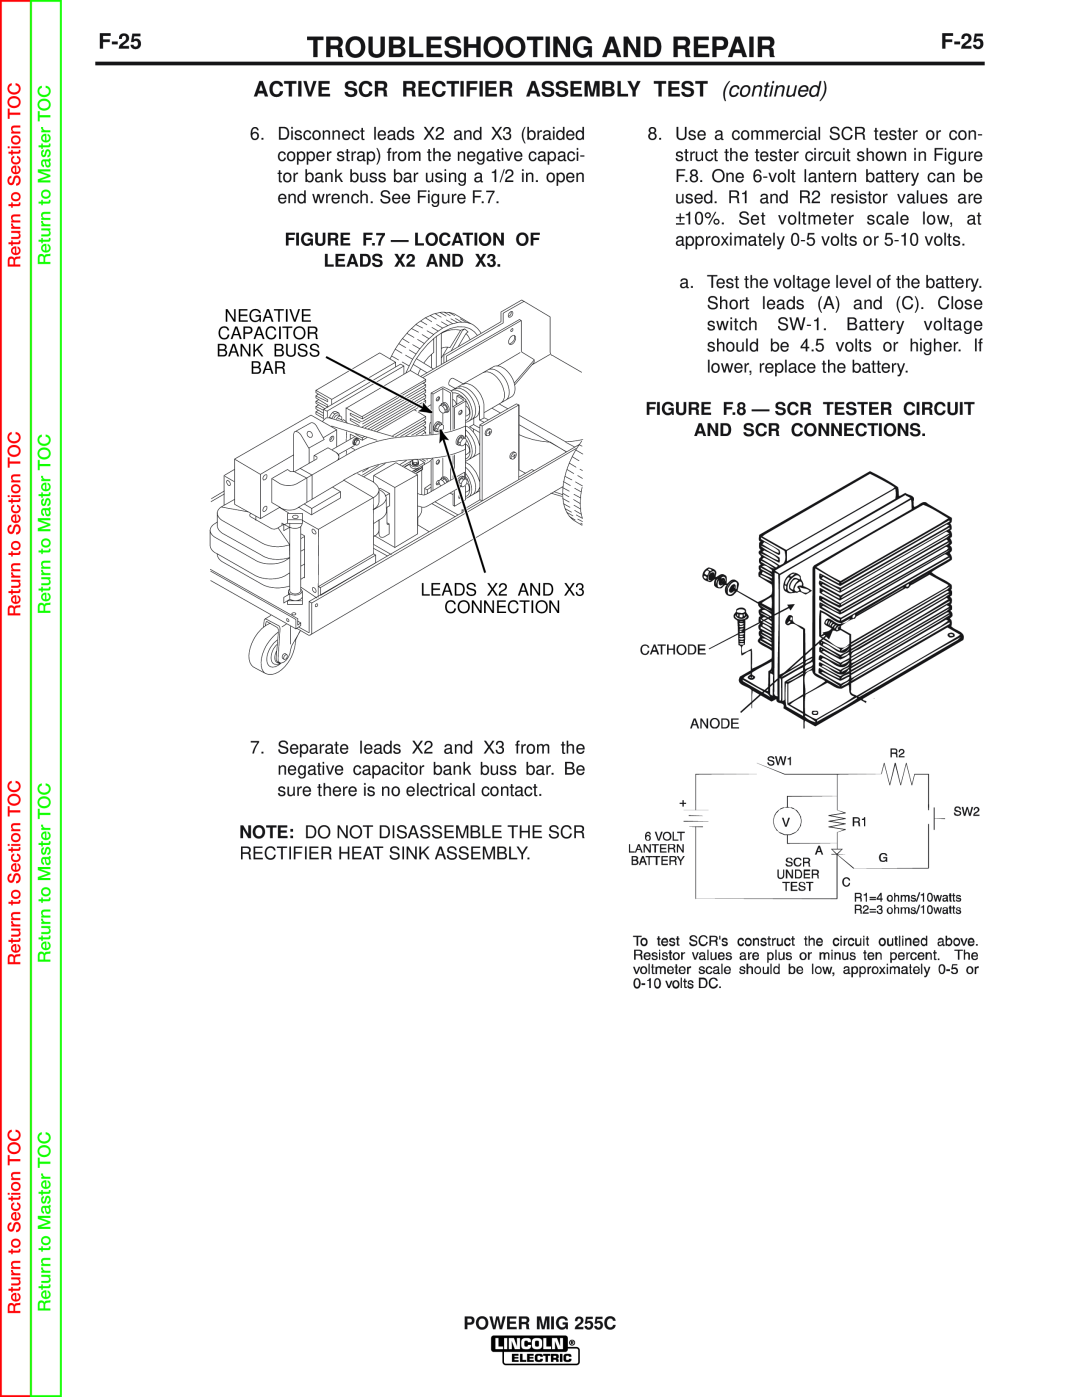 Lincoln Electric SVM170-A service manual F-25, Troubleshooting And Repair, ACTIVE SCR RECTIFIER ASSEMBLY TEST continued 